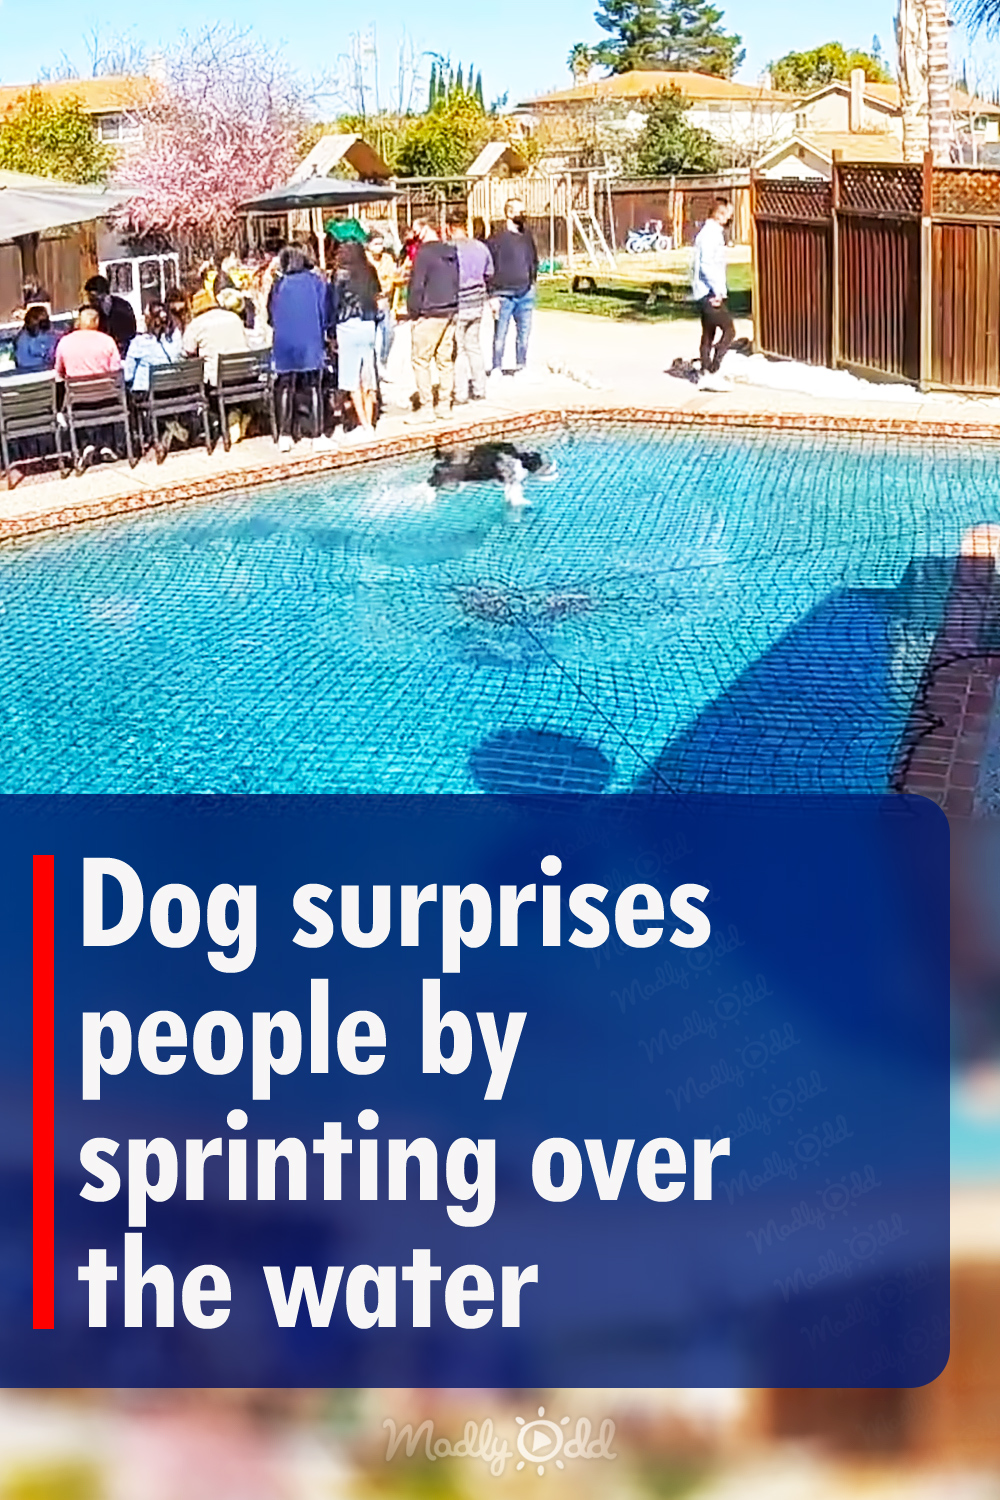 Dog surprises people by sprinting over the water